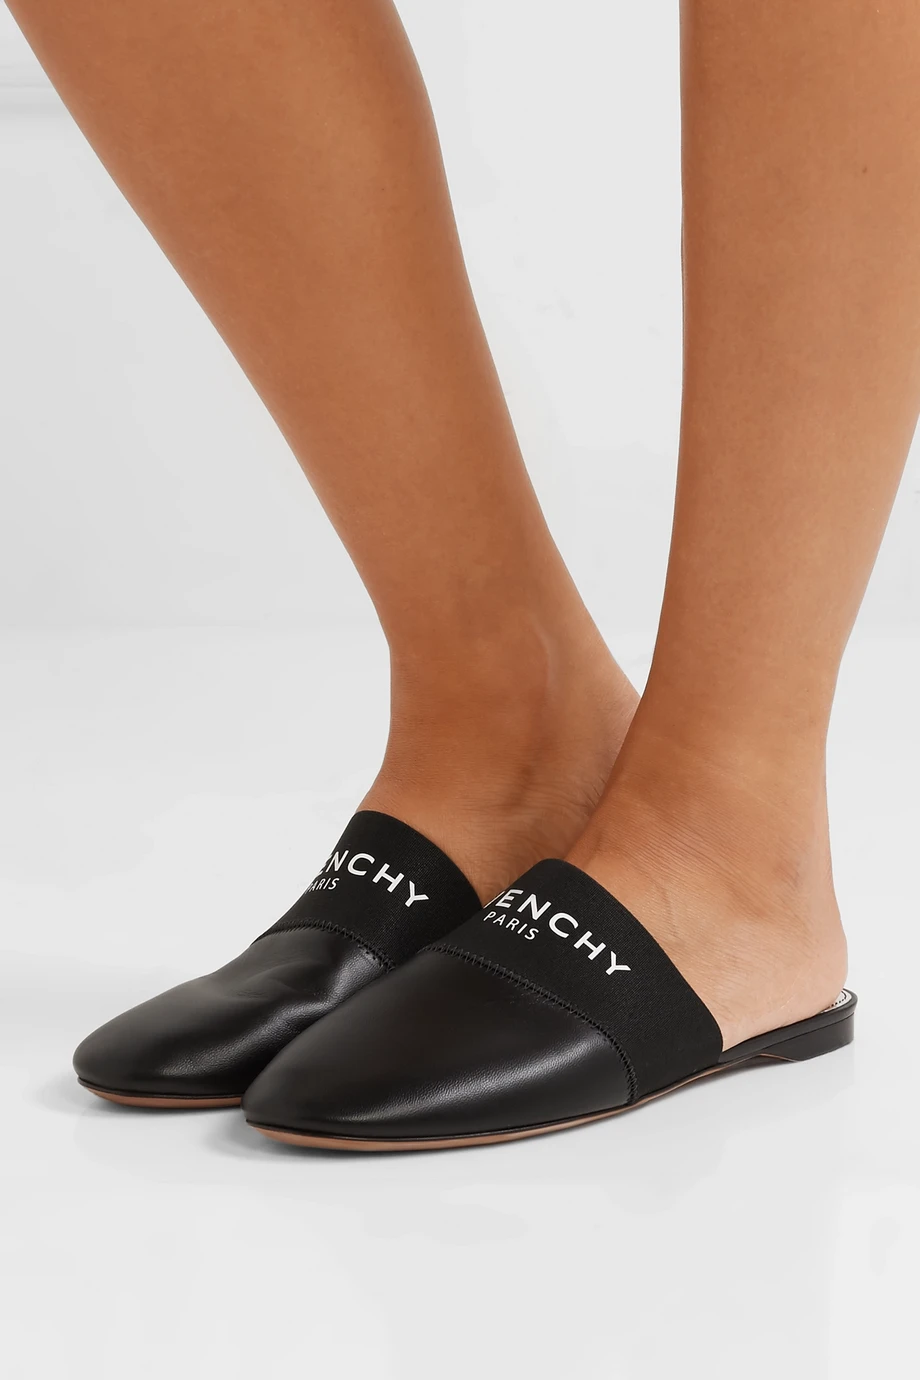 Givenchy logo print slippers